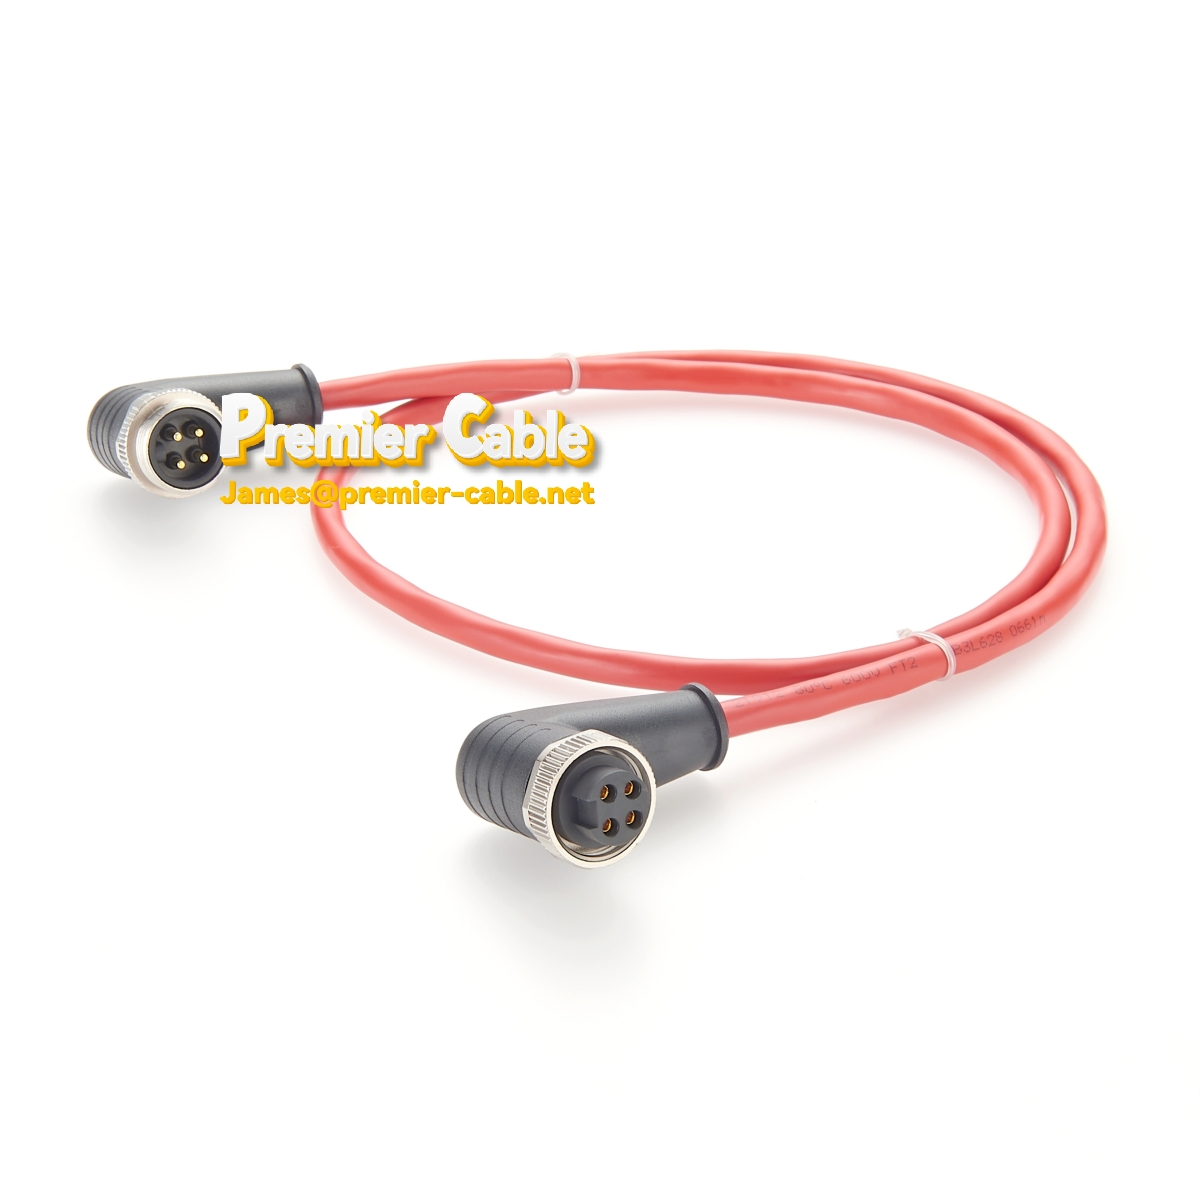 CC-Link cable with 4-pin 7/8